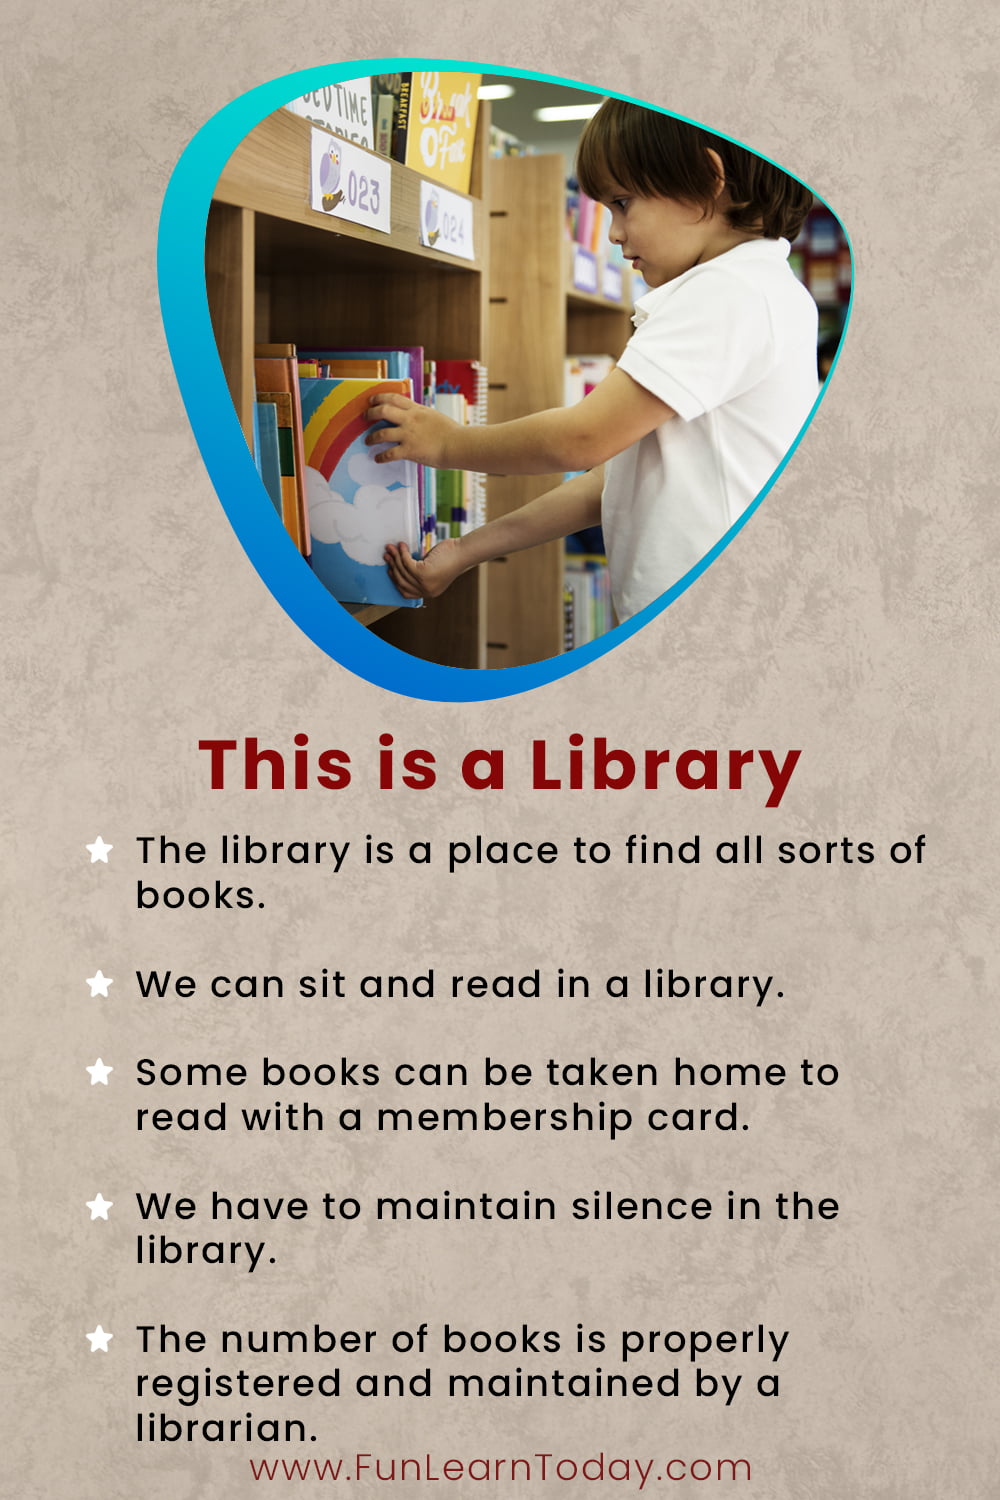 This is a library